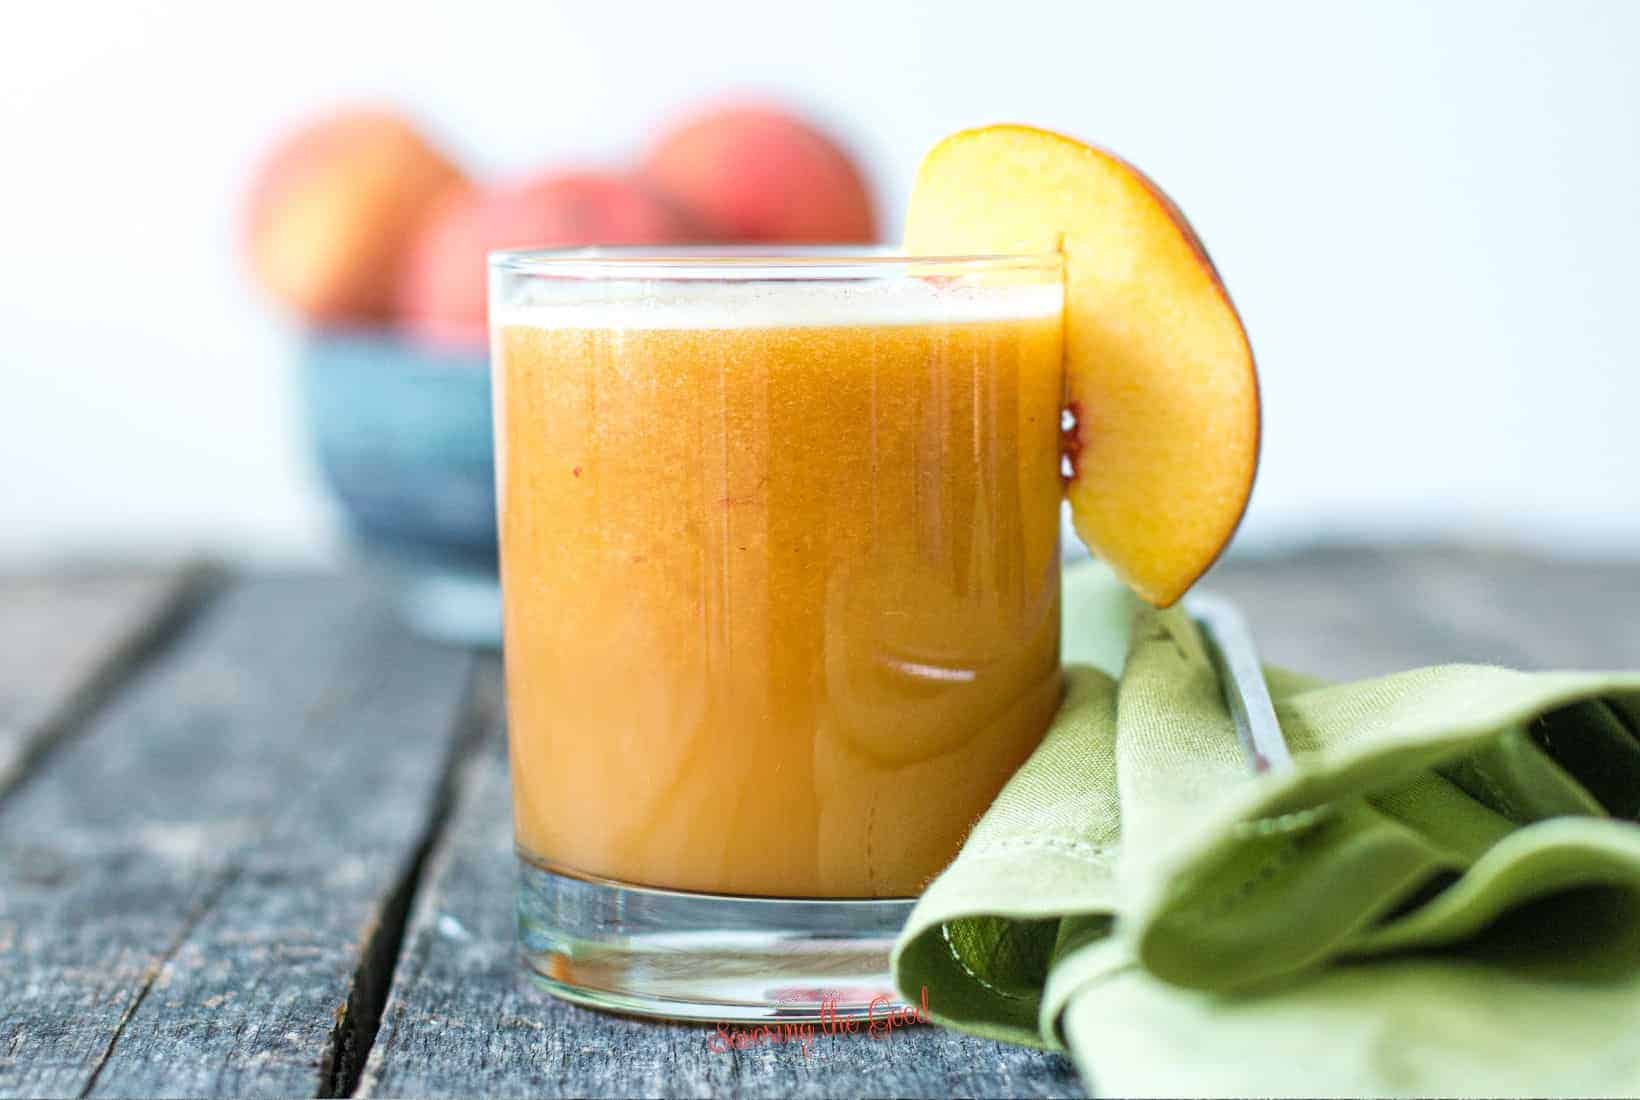 horizontal image of fresh peach juice in a clear glass garnished with a fresh peach sice, green cloth napkin to the right side